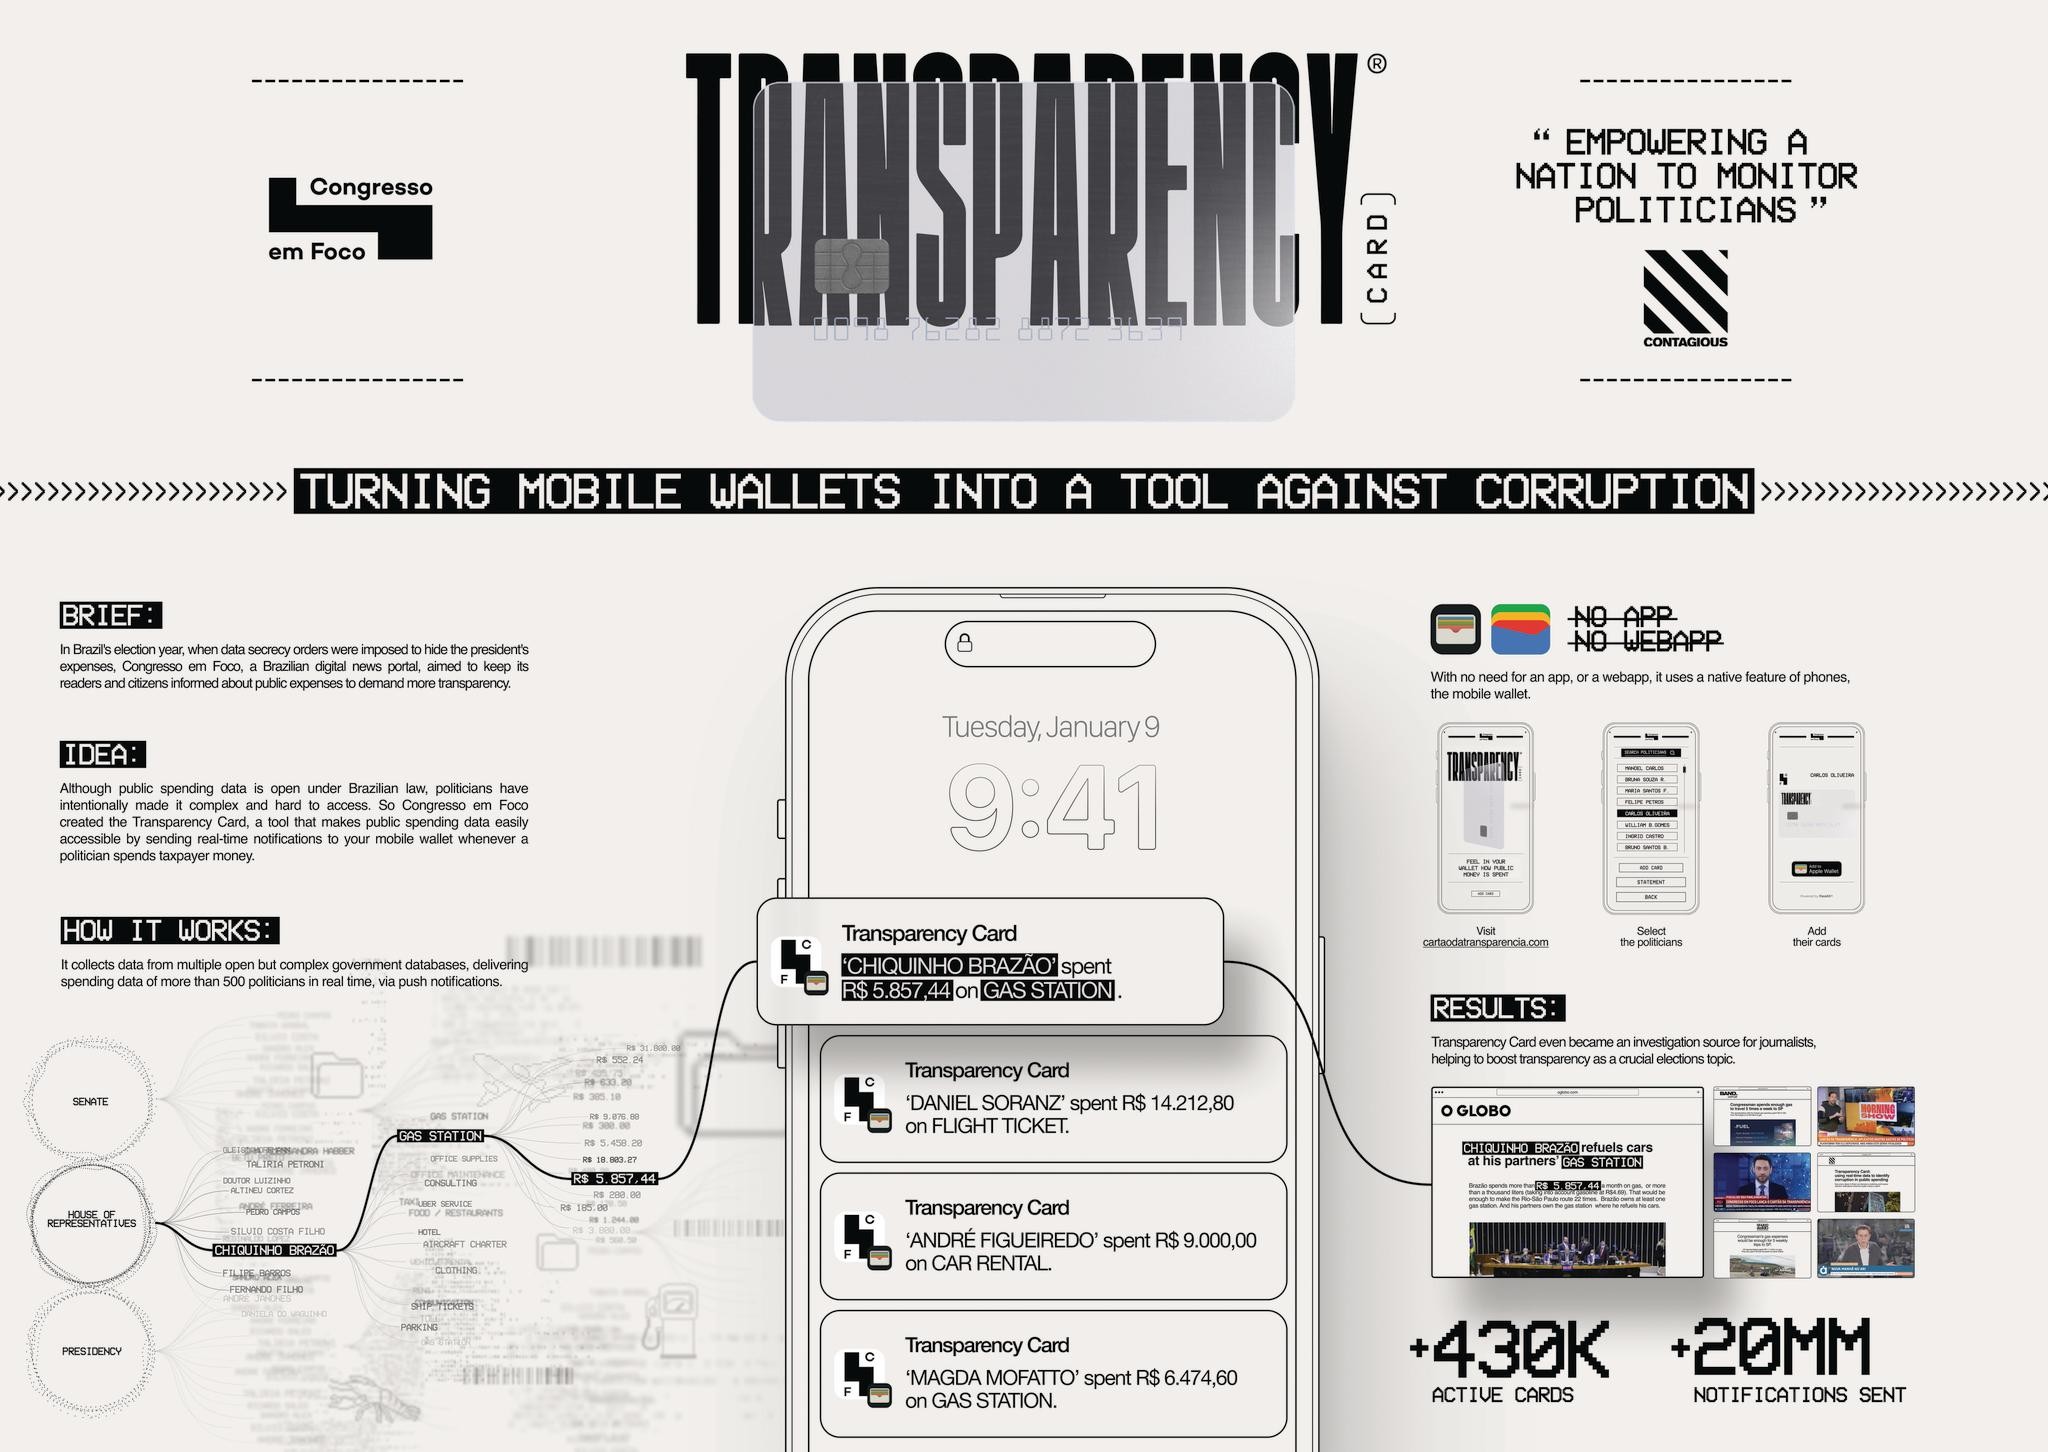 TRANSPARENCY CARD